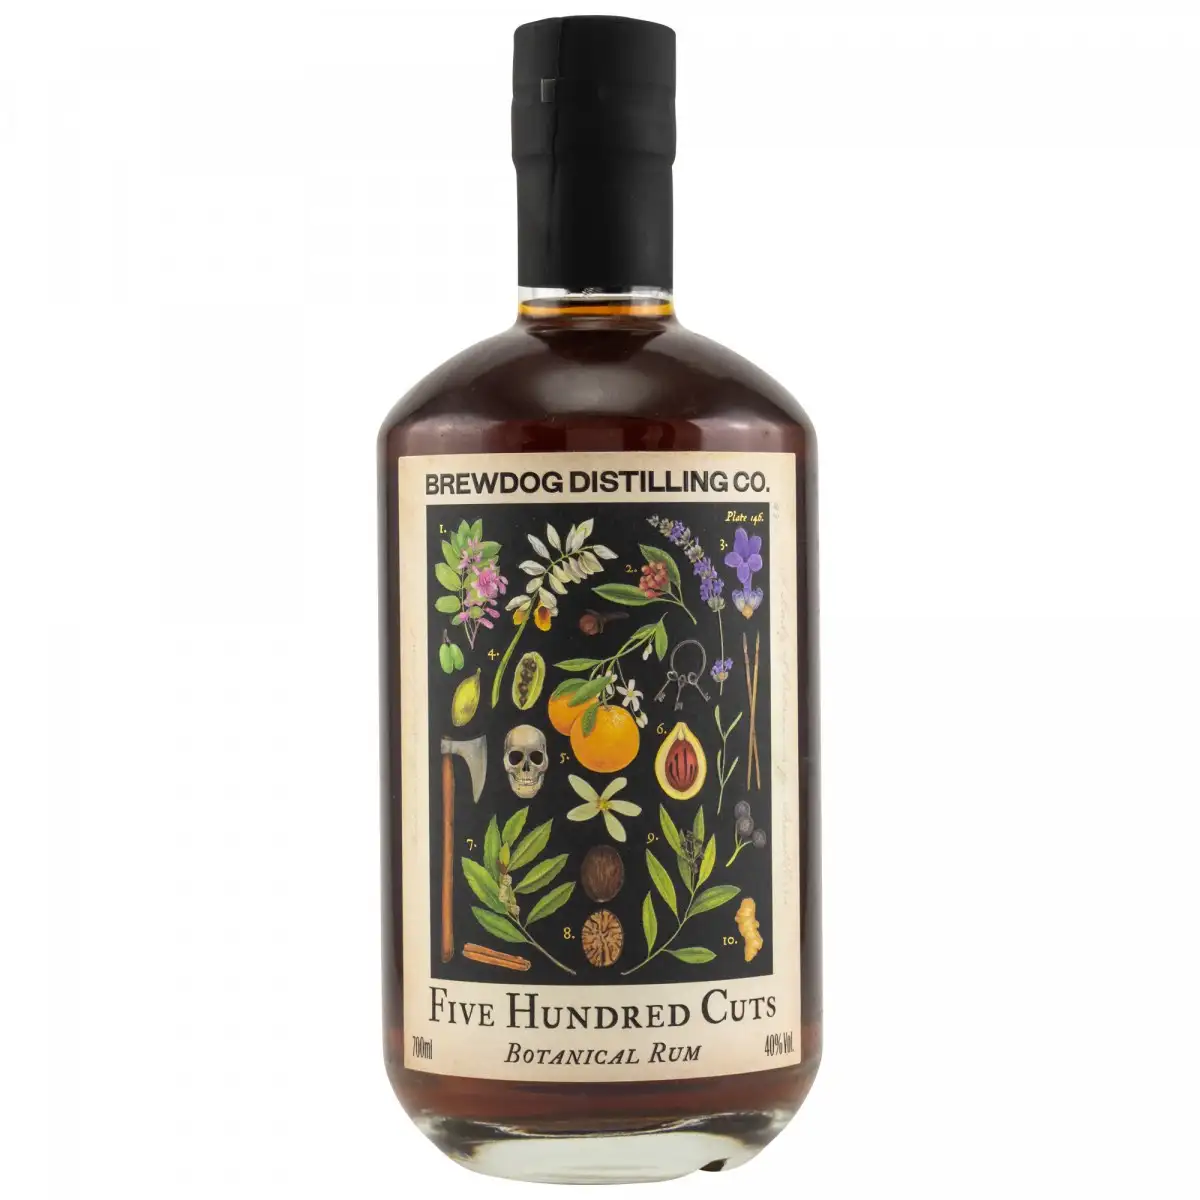 Image of the front of the bottle of the rum Five Hundred Cuts Botanical Rum